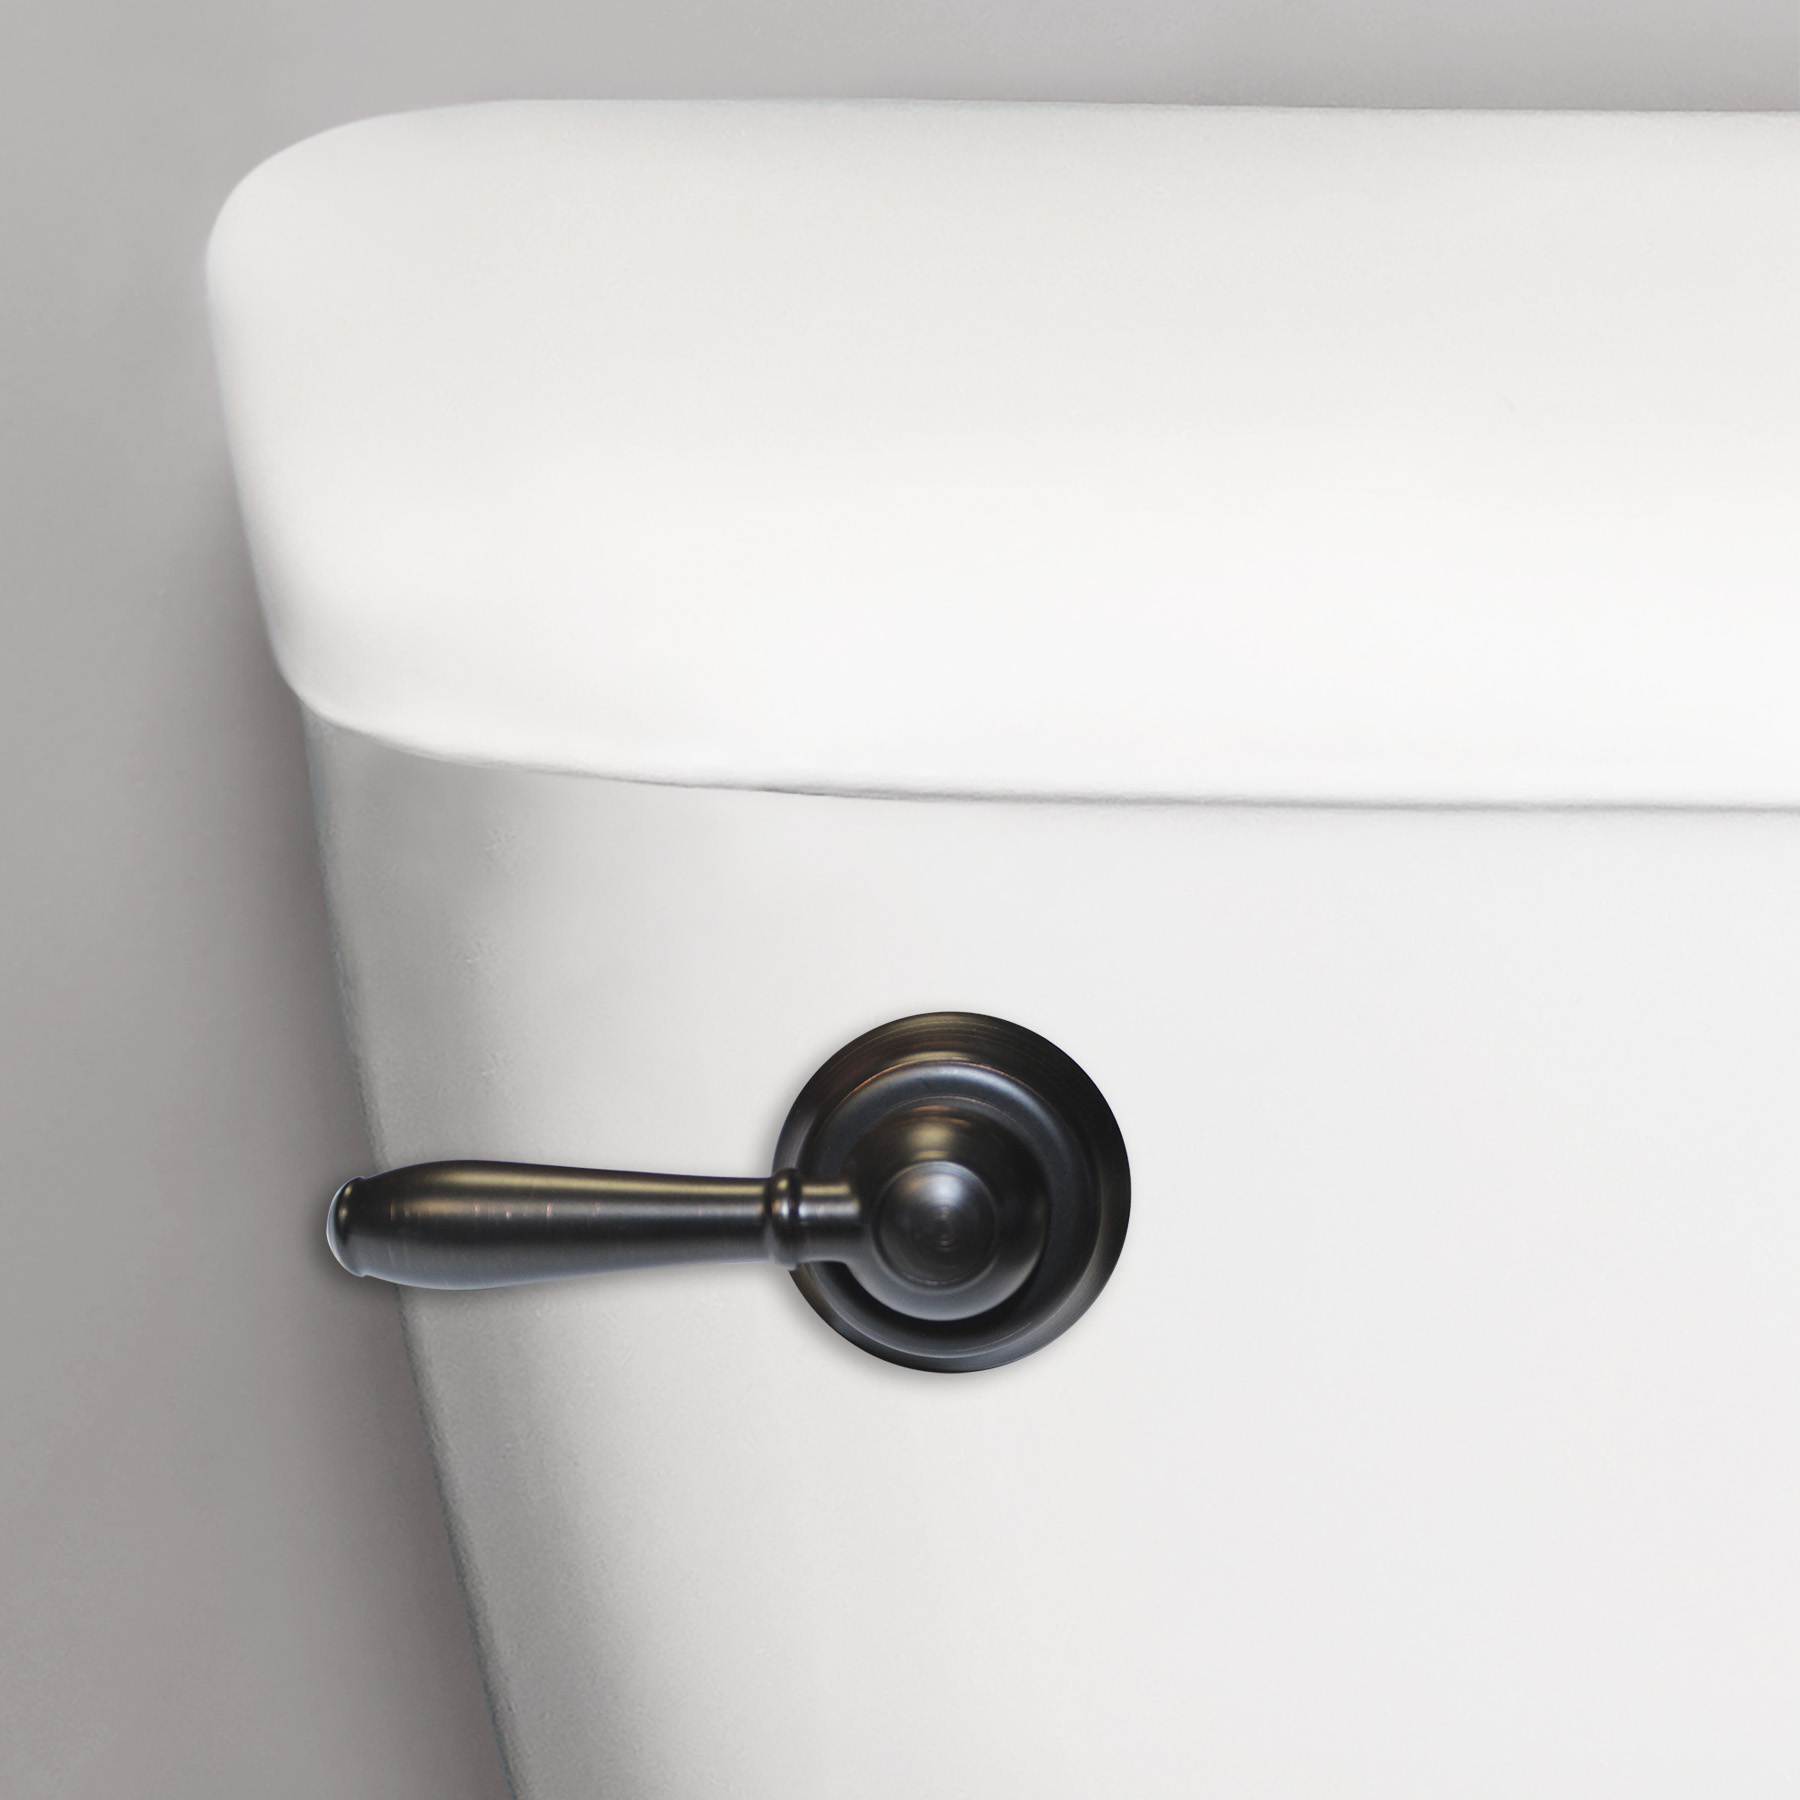 Close up image of oil rubbed bronze toilet handle on a toilet